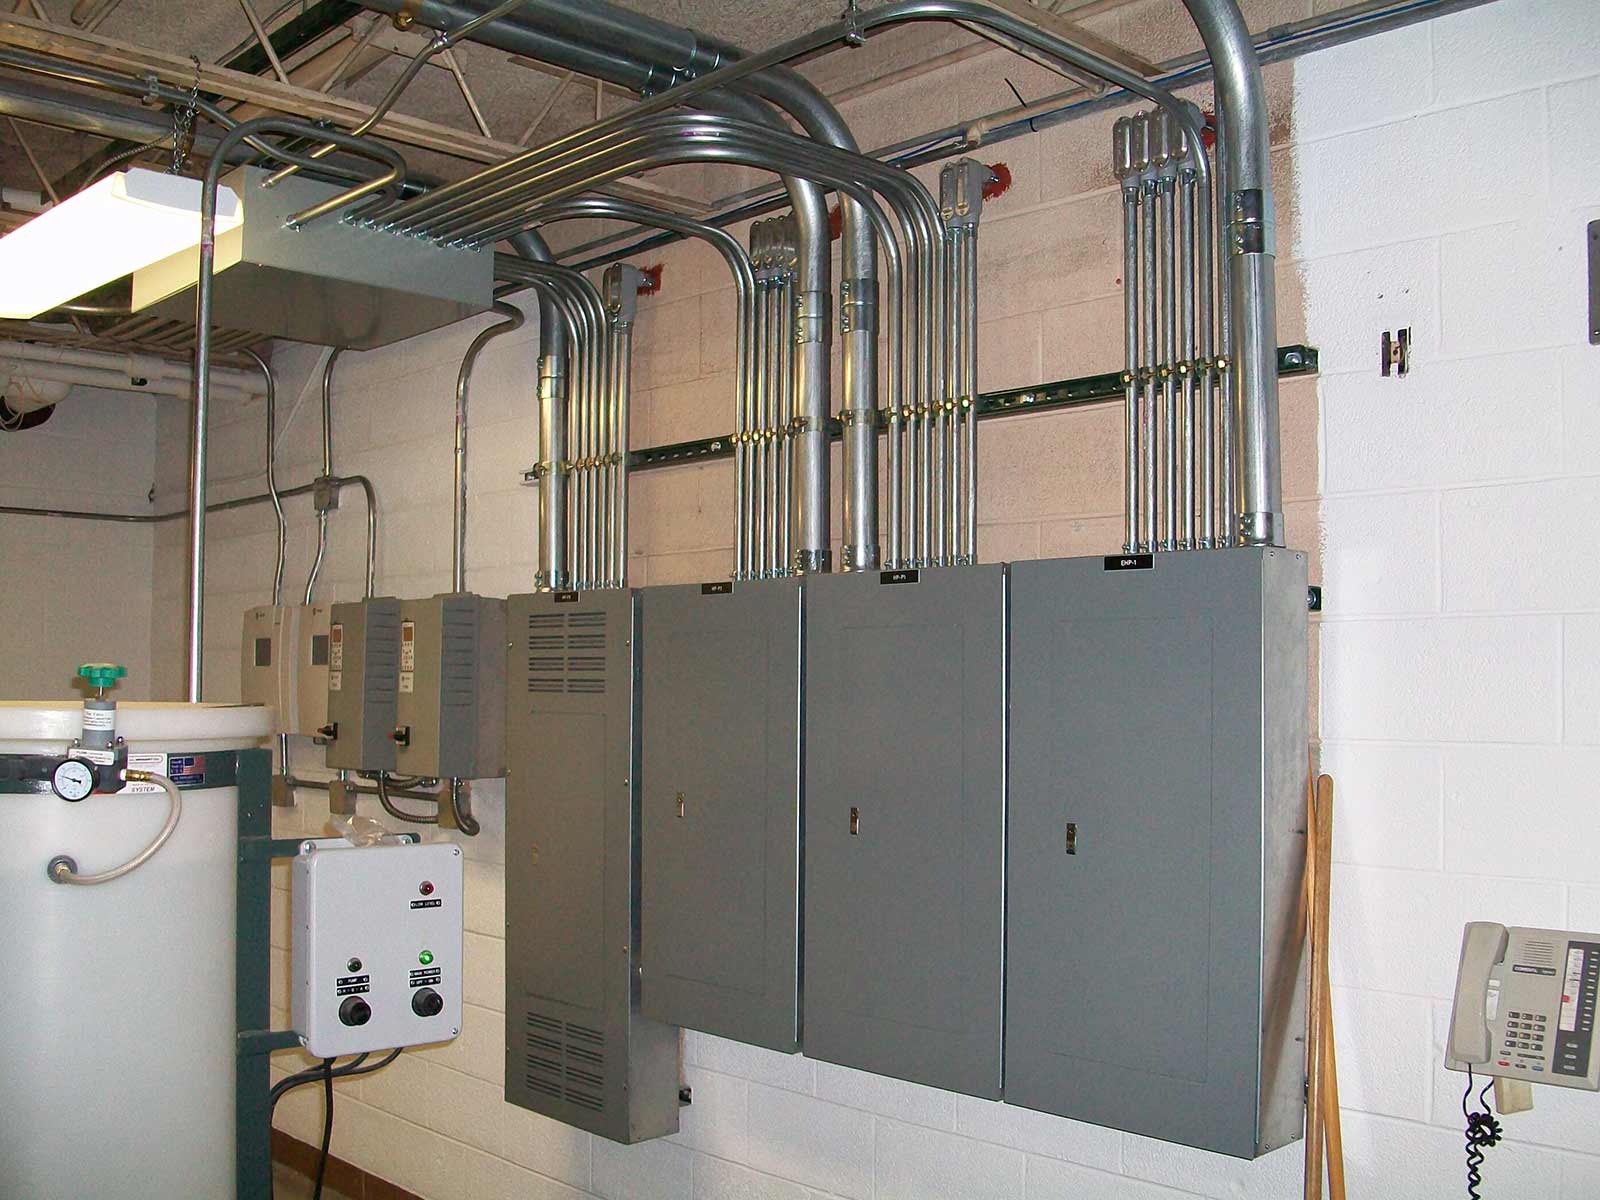 electric service panels in a commercial building